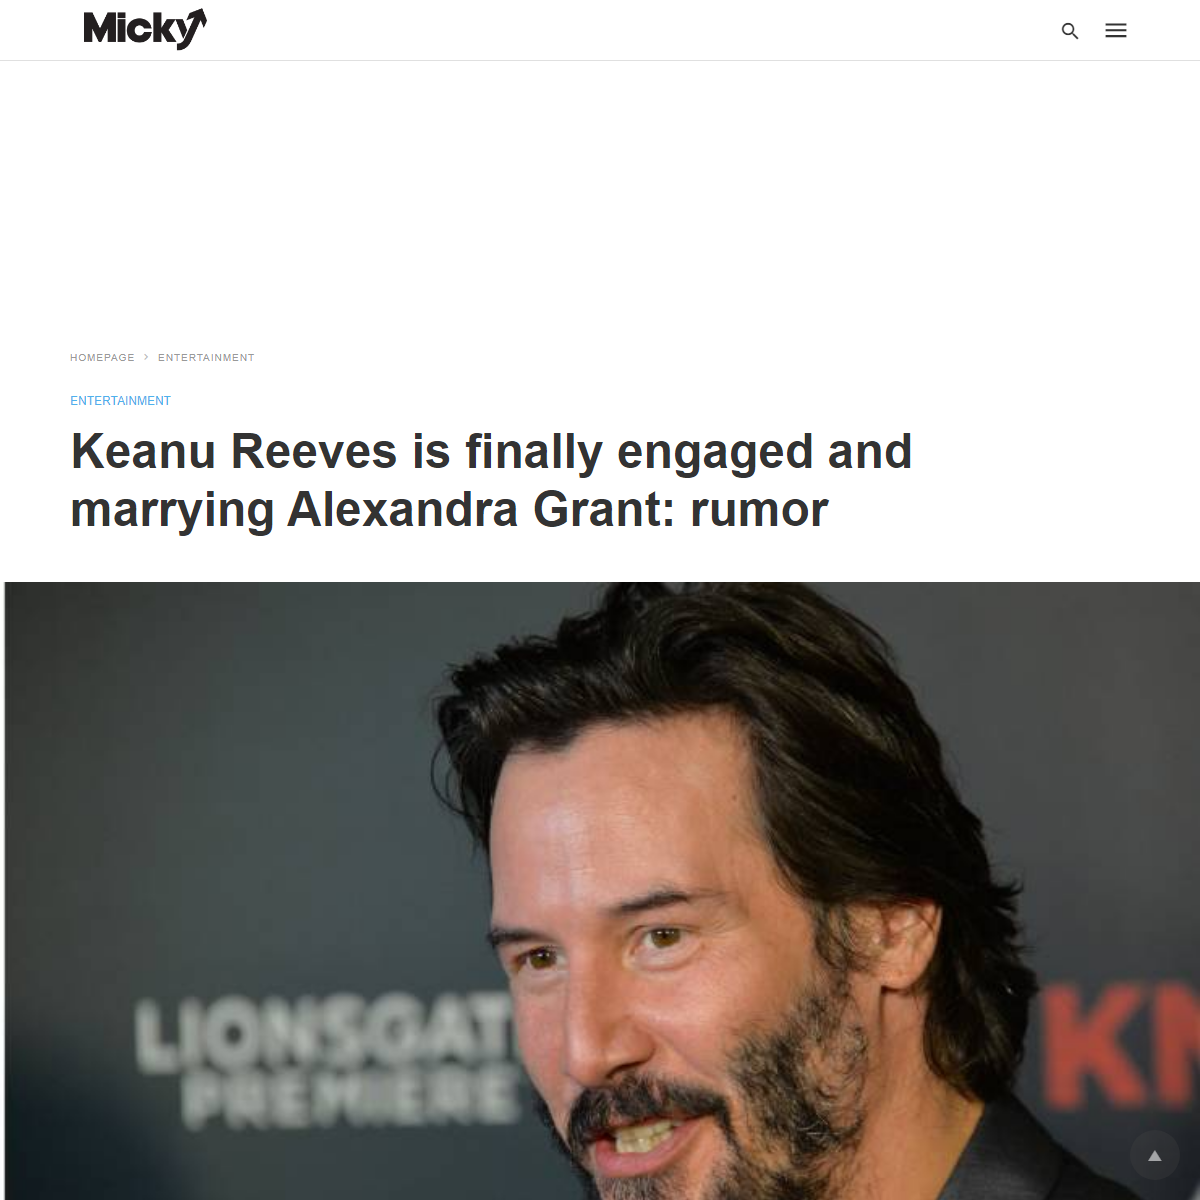 A complete backup of https://micky.com.au/keanu-reeves-is-finally-engaged-and-marrying-alexandra-grant-rumor/